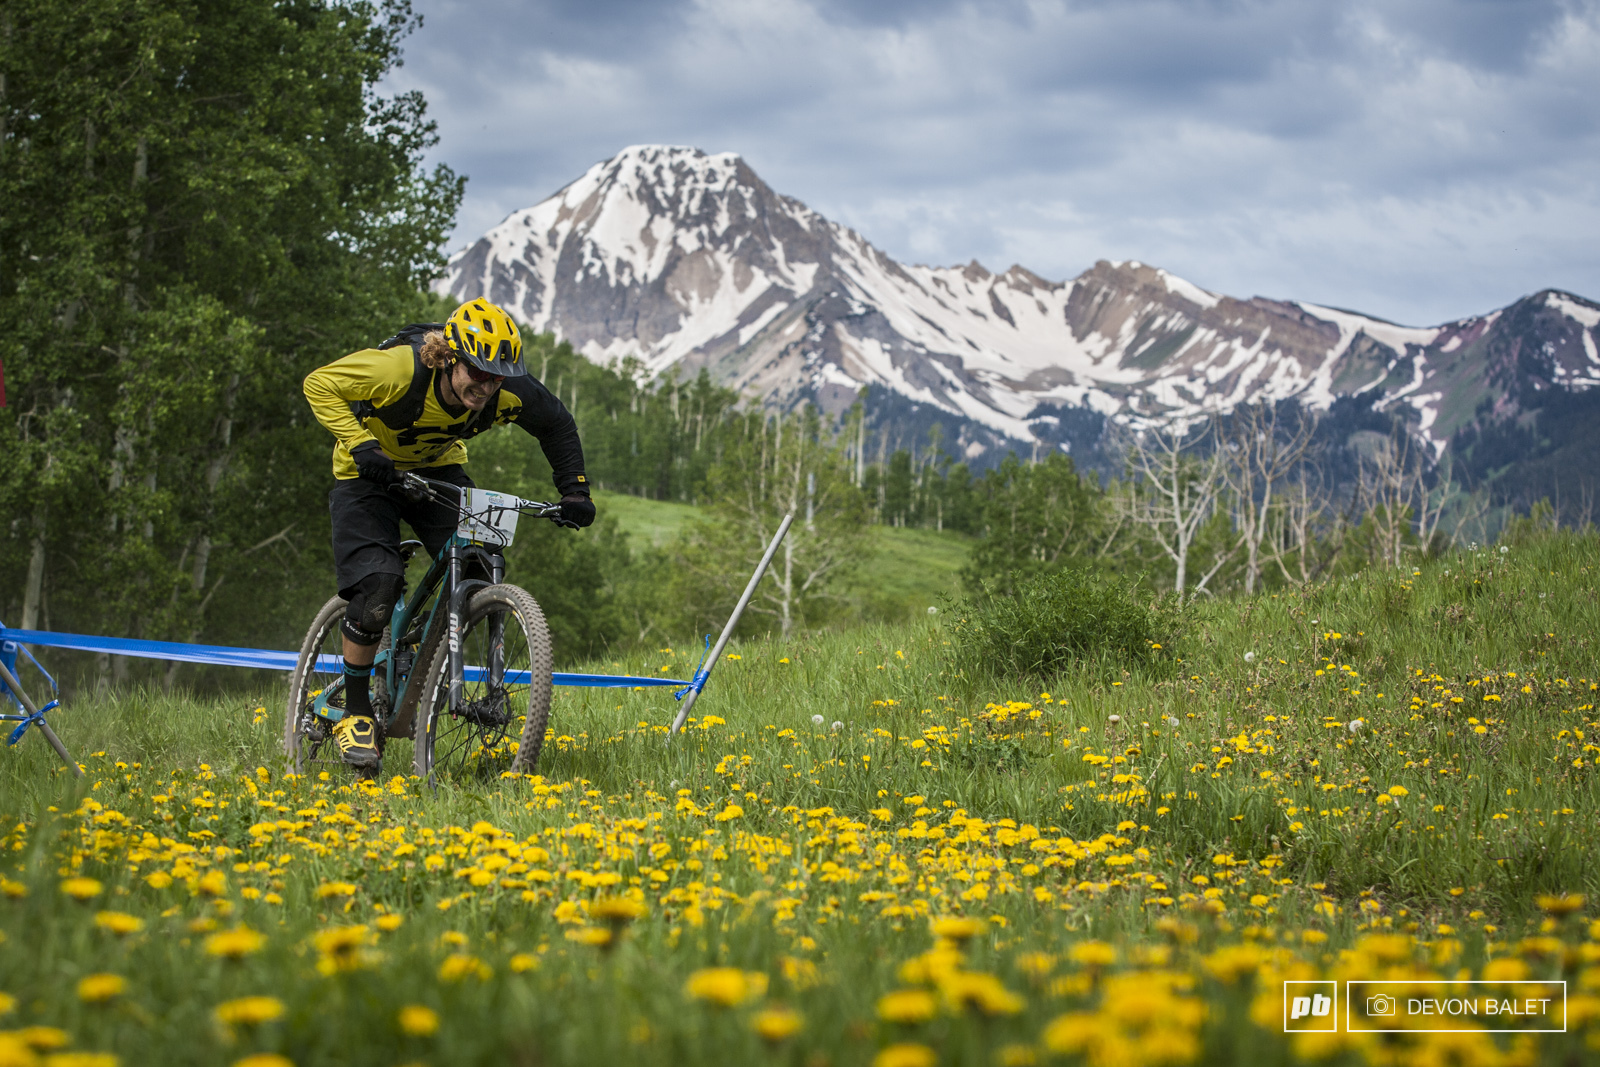 Stage one of racing sent racers into some incredibly scenic areas of Snowmass mountain. Alex Petitdemange grins as he hammers out a flat section, no time to enjoy the views!